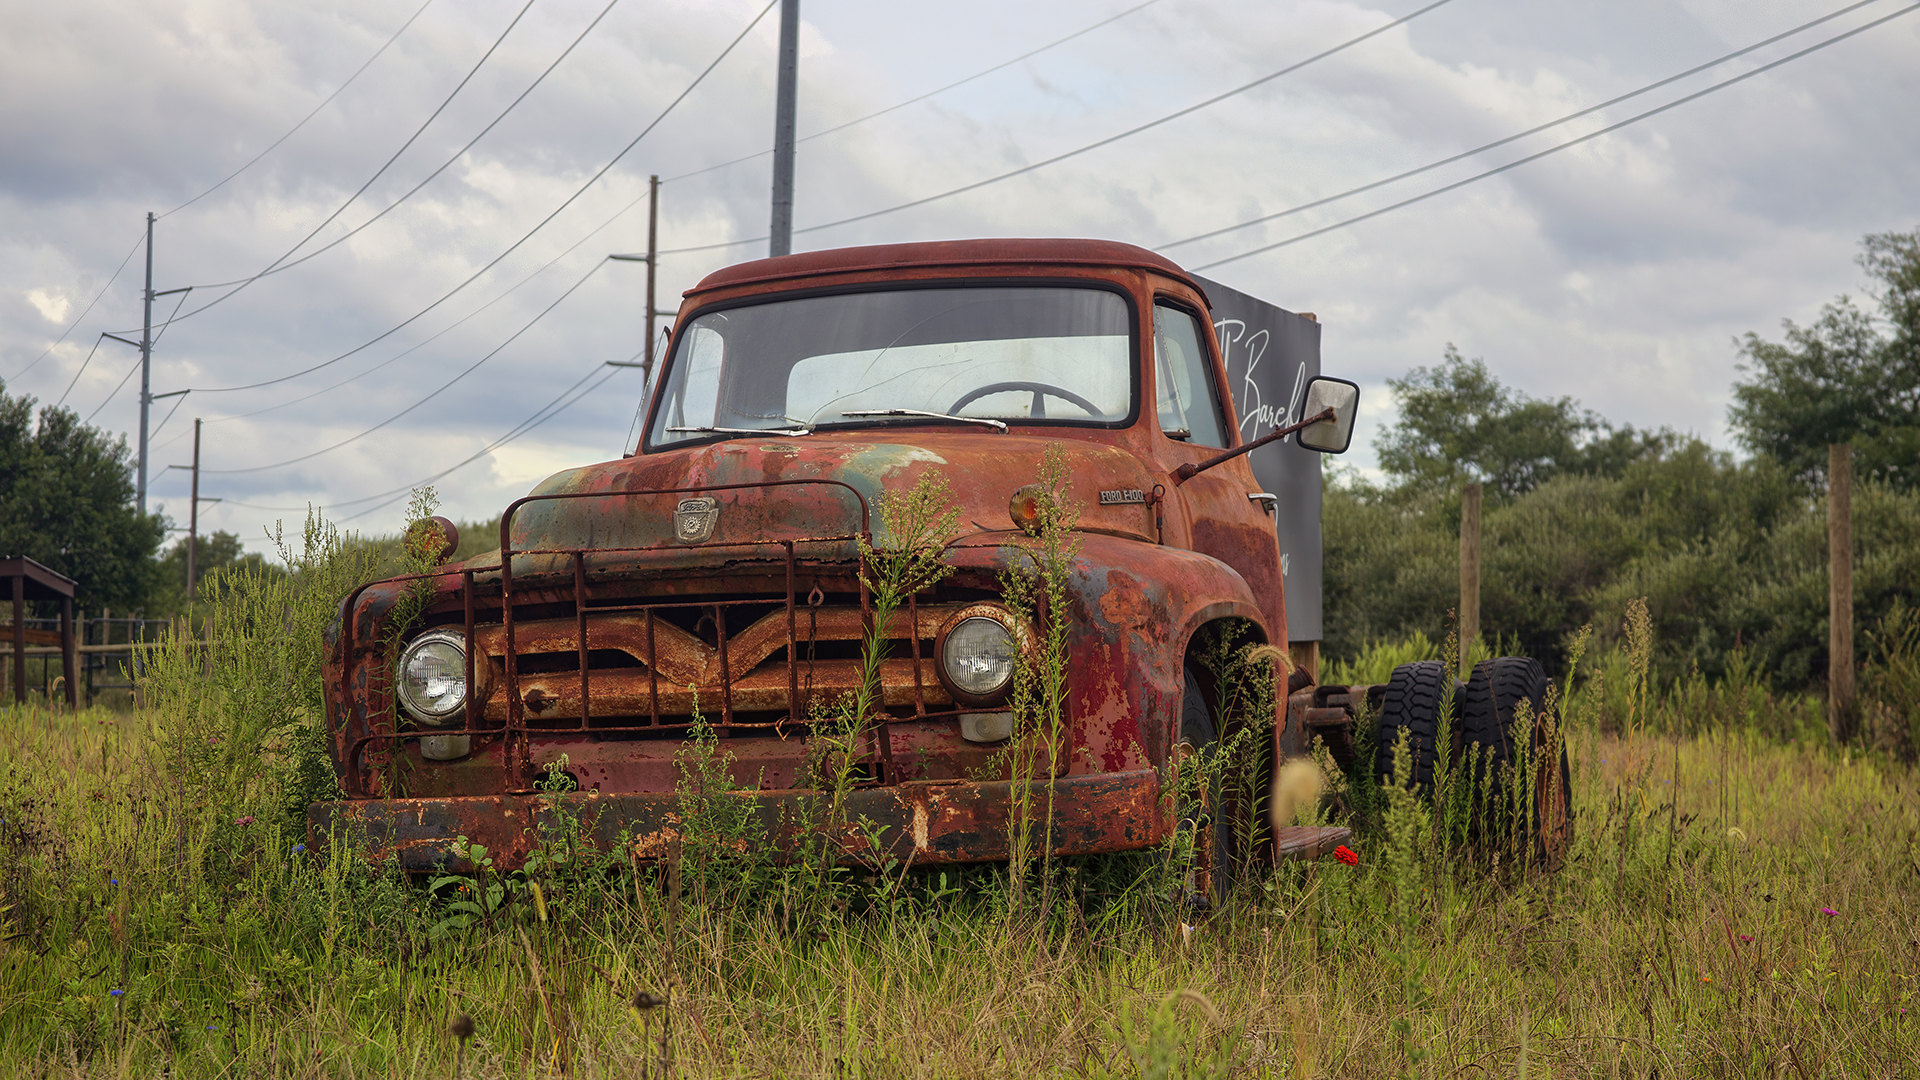 Put Out to Pasture